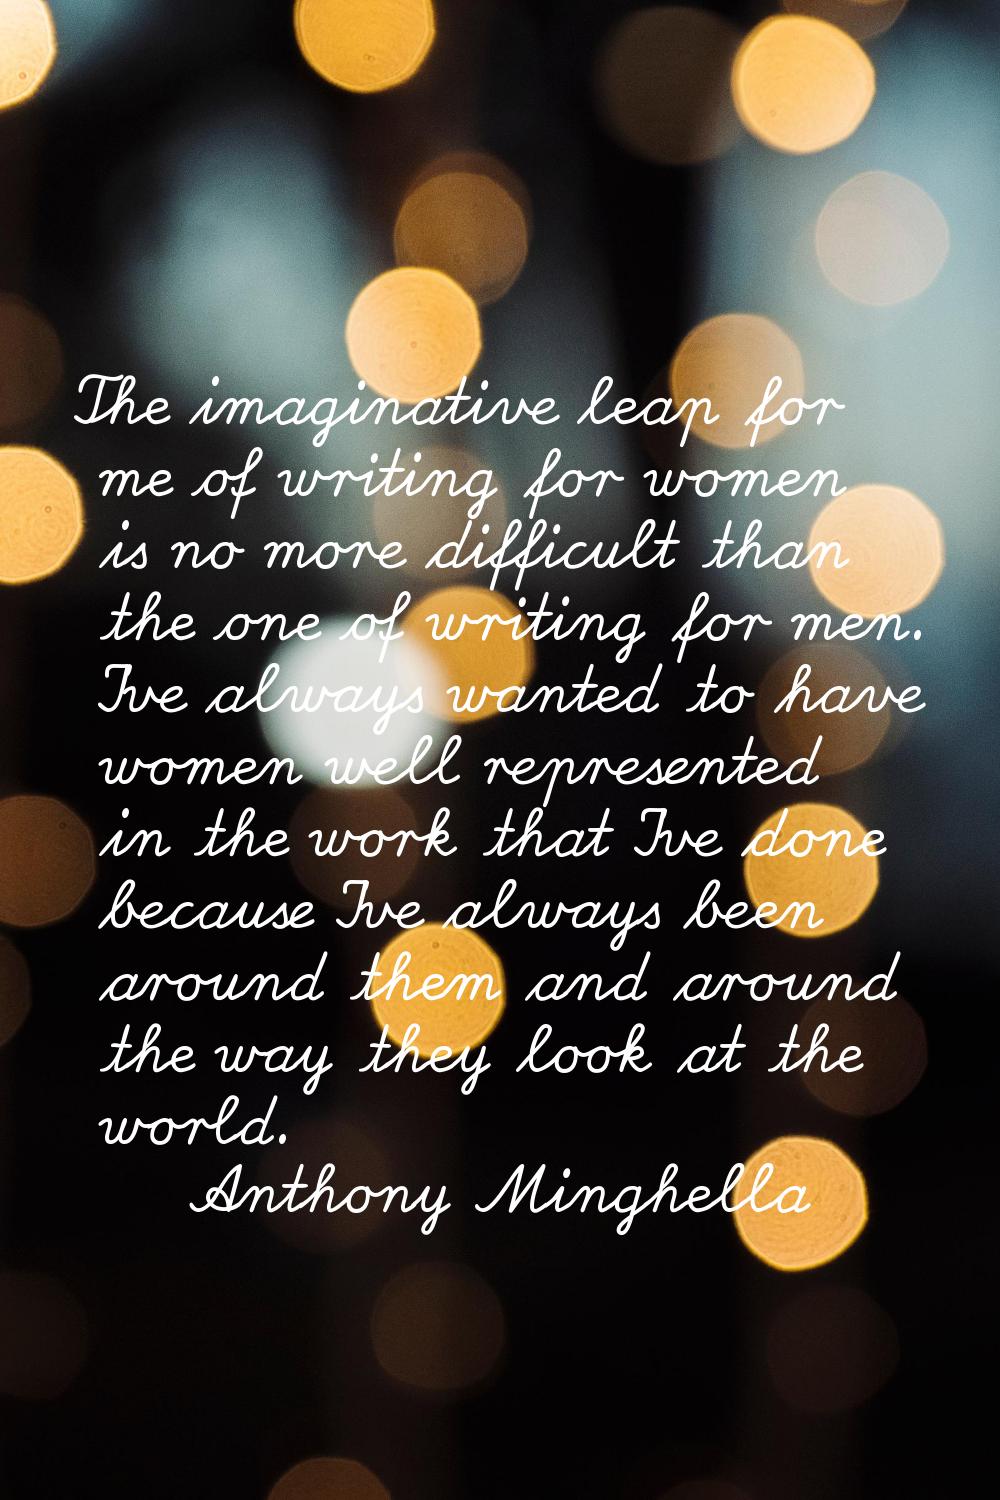 The imaginative leap for me of writing for women is no more difficult than the one of writing for m